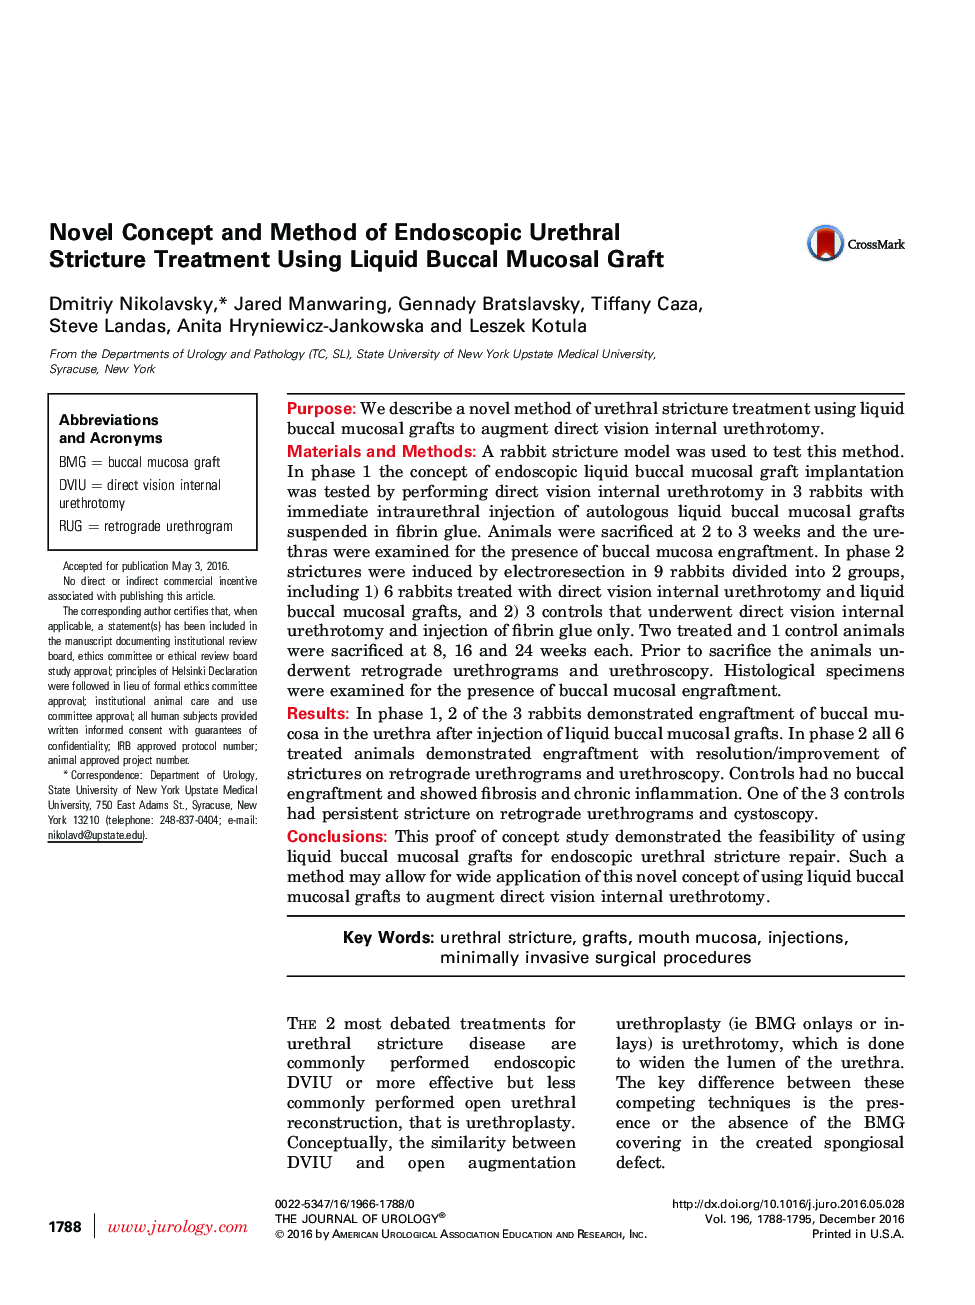 Novel Concept and Method of Endoscopic Urethral Stricture Treatment Using Liquid Buccal Mucosal Graft